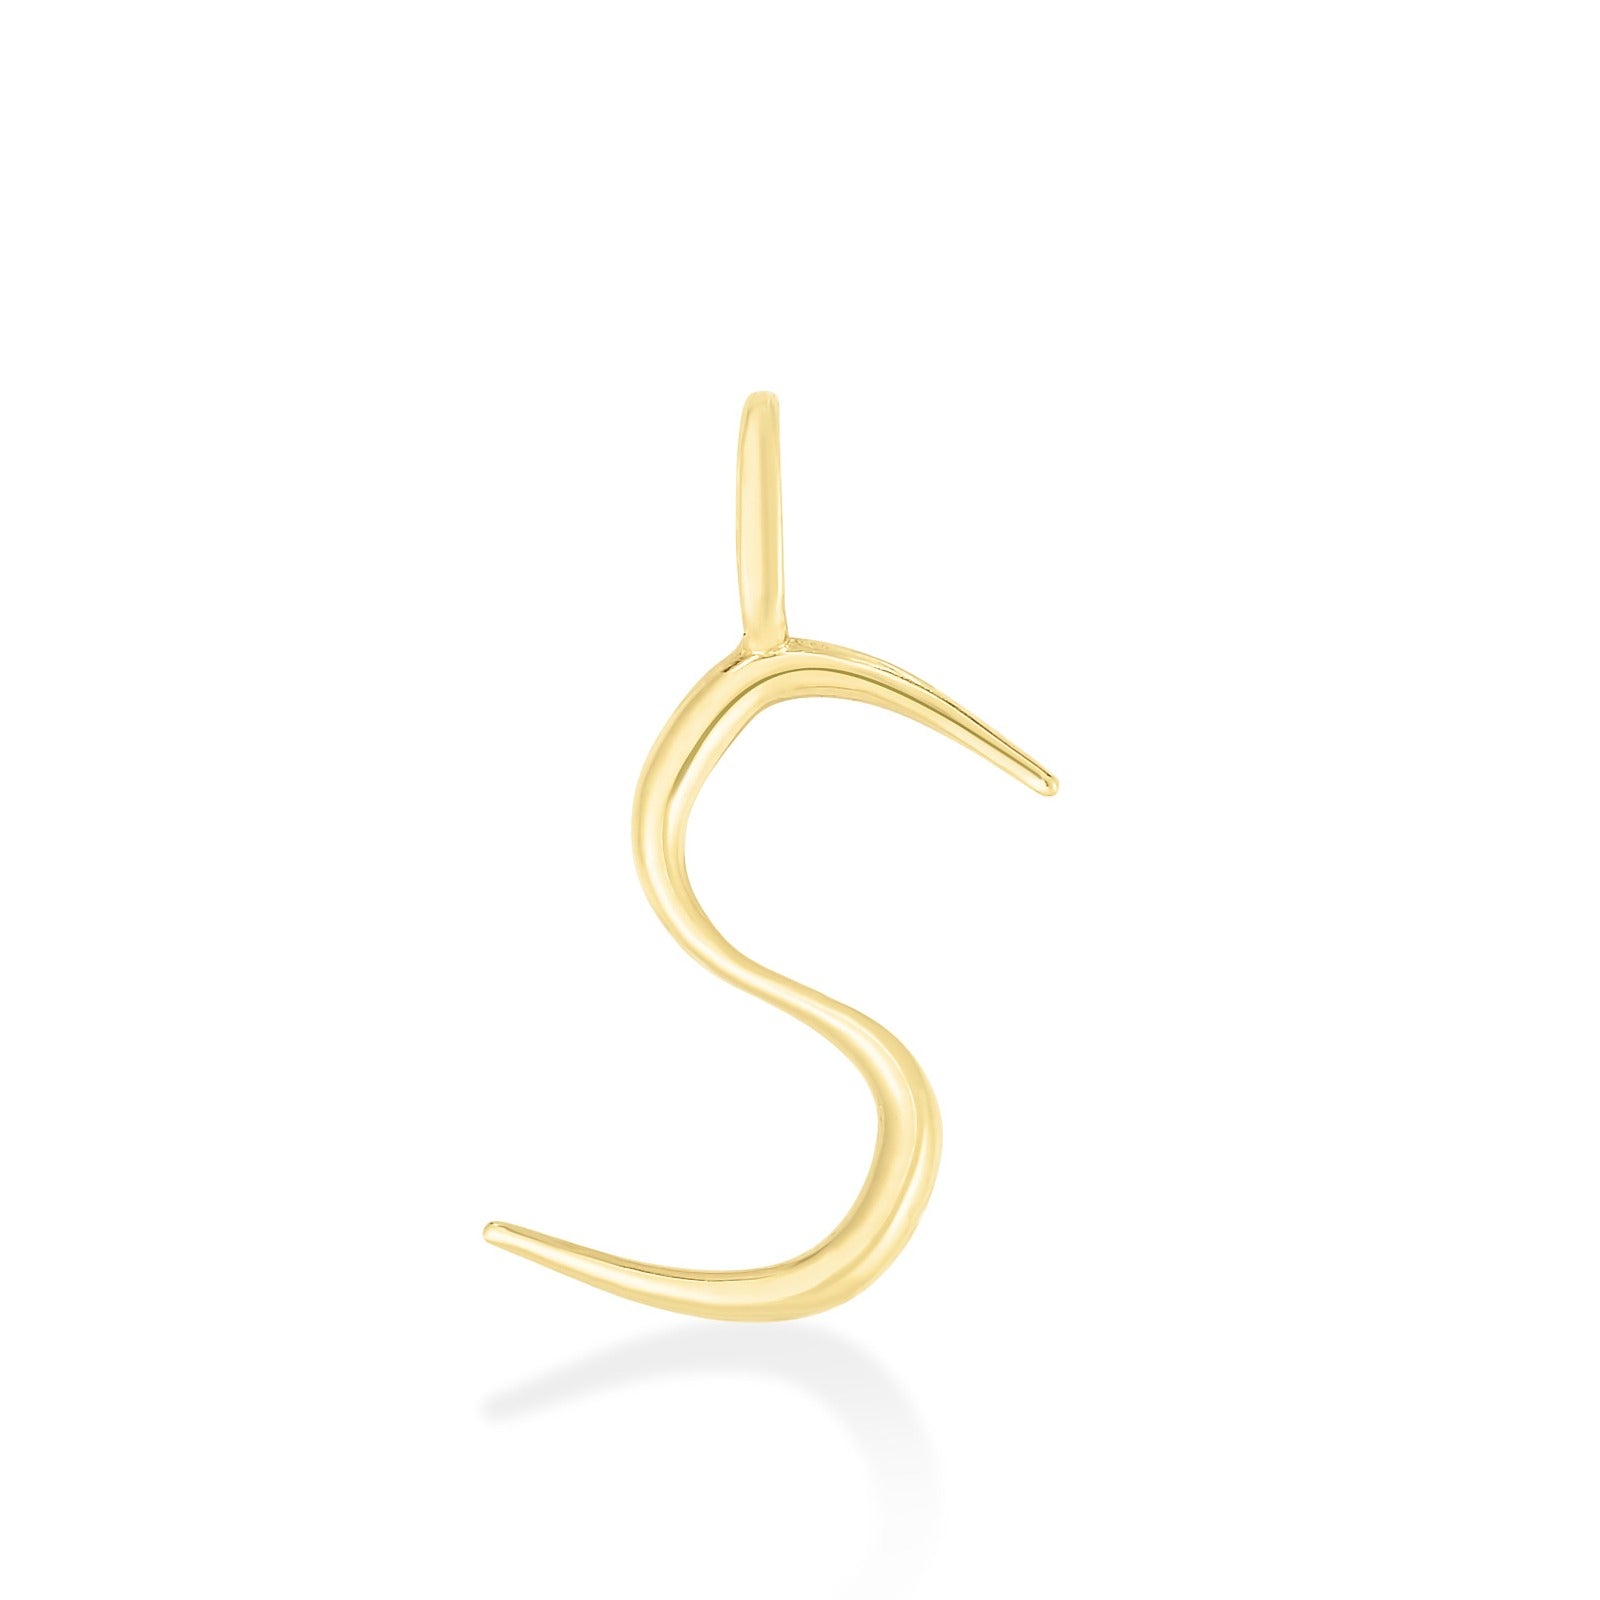 14K yellow gold S letter charm. 